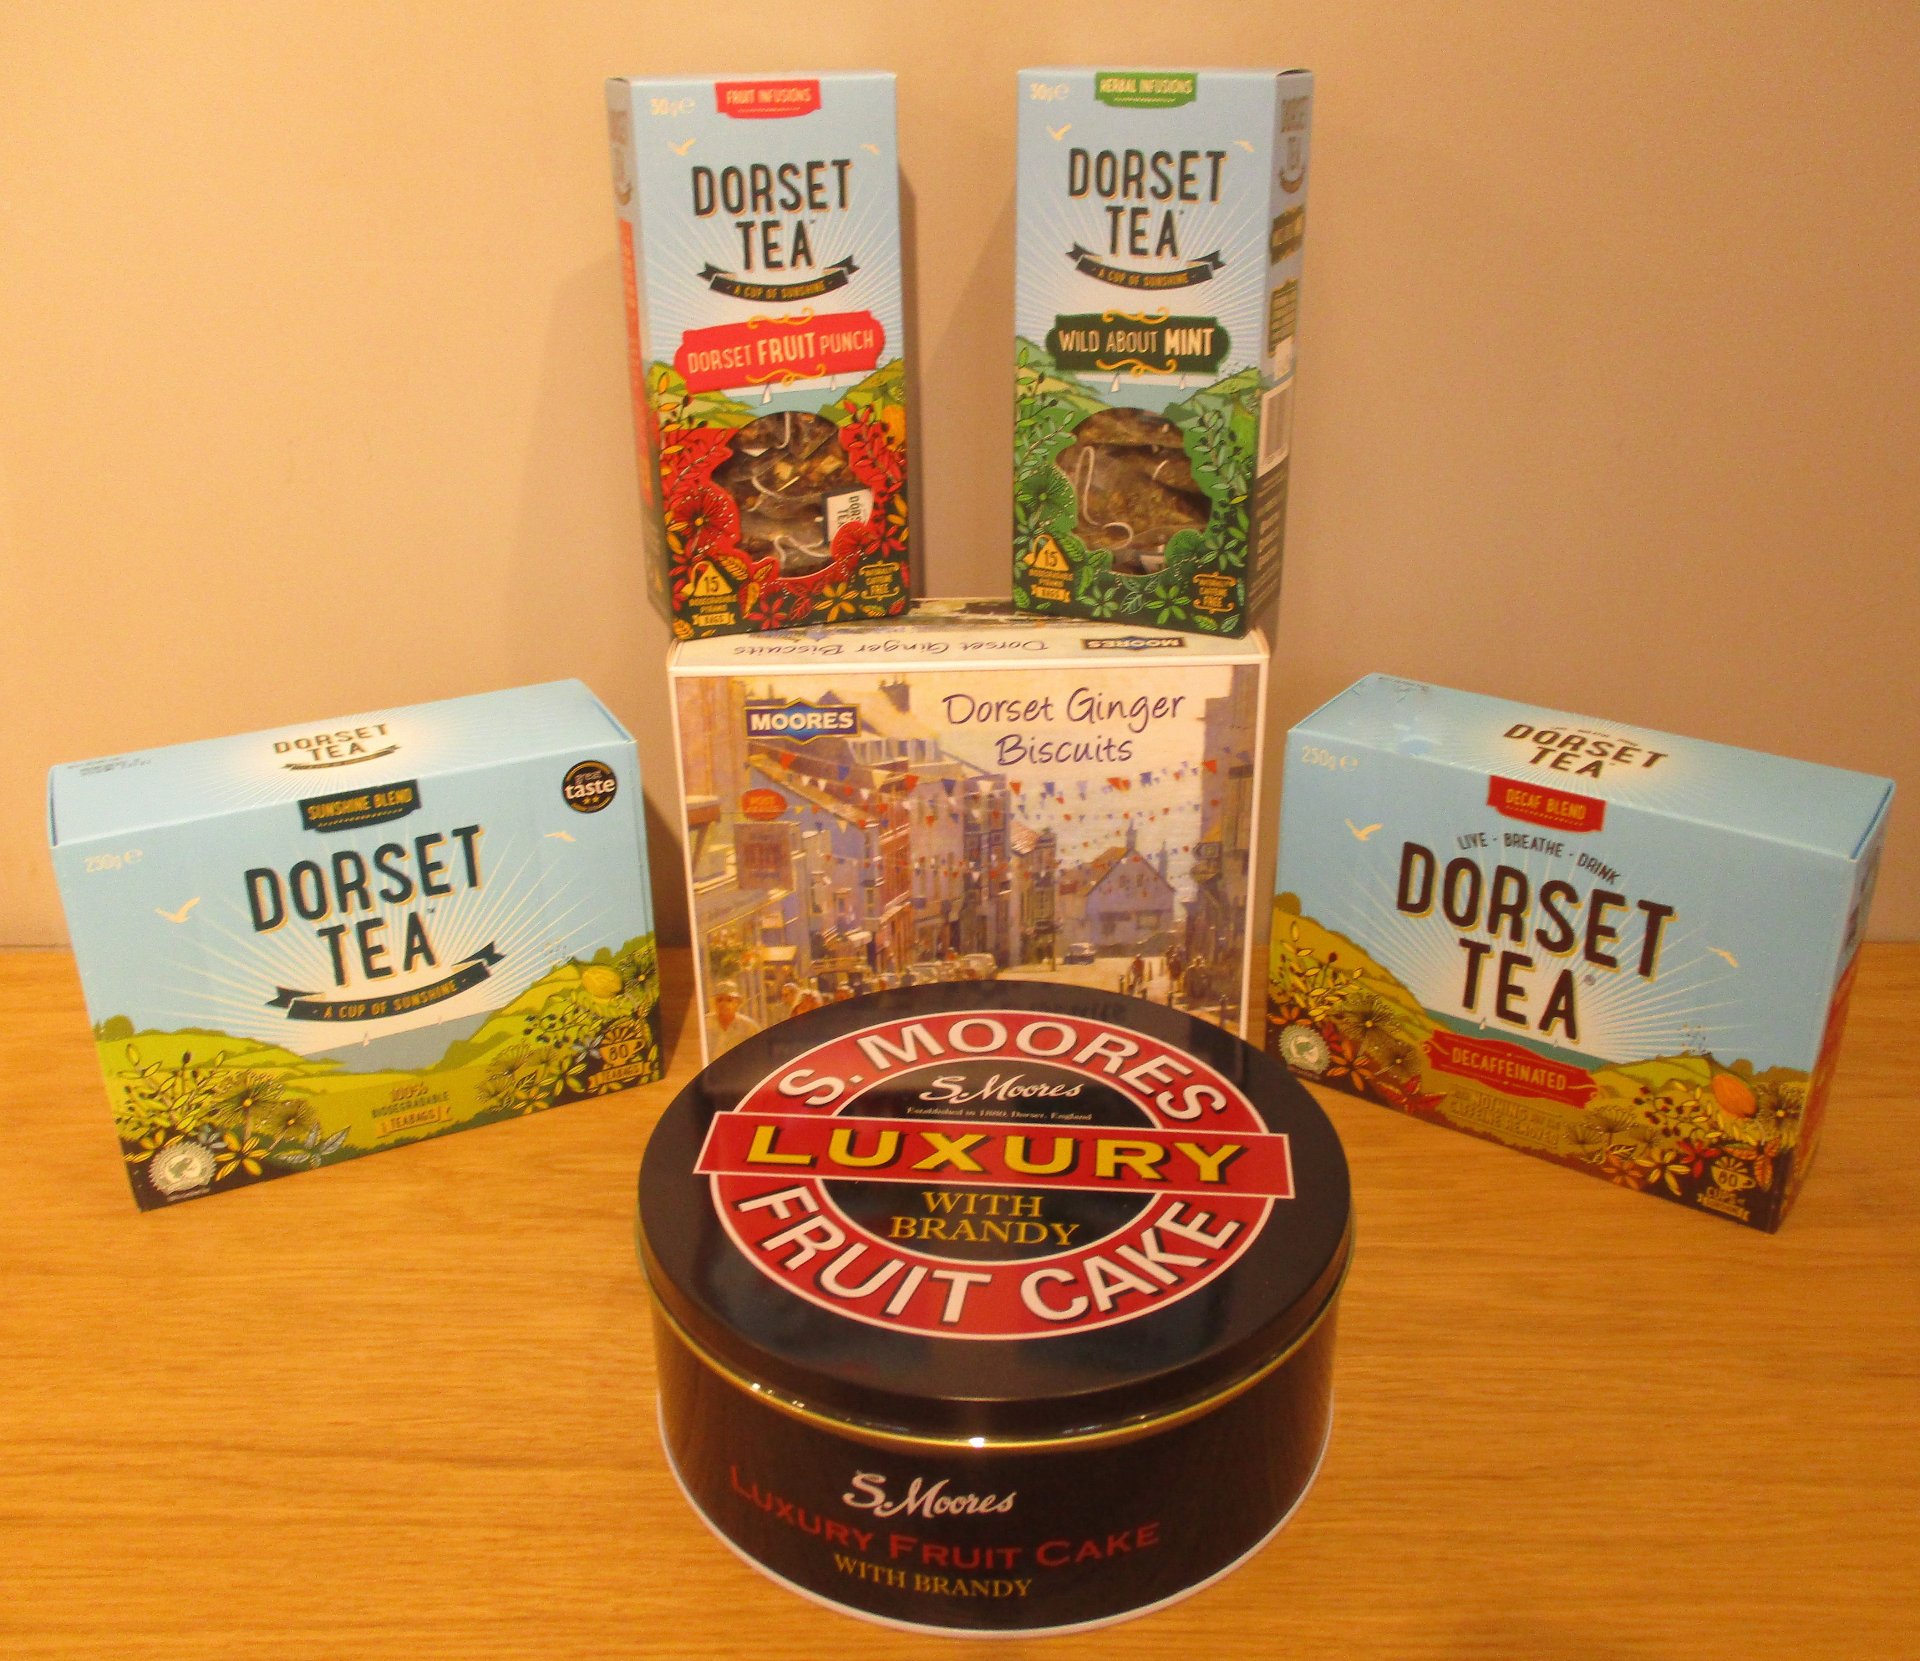 Dorset Tea selection and Moores biscuits, and fruit cake in a luxury tin